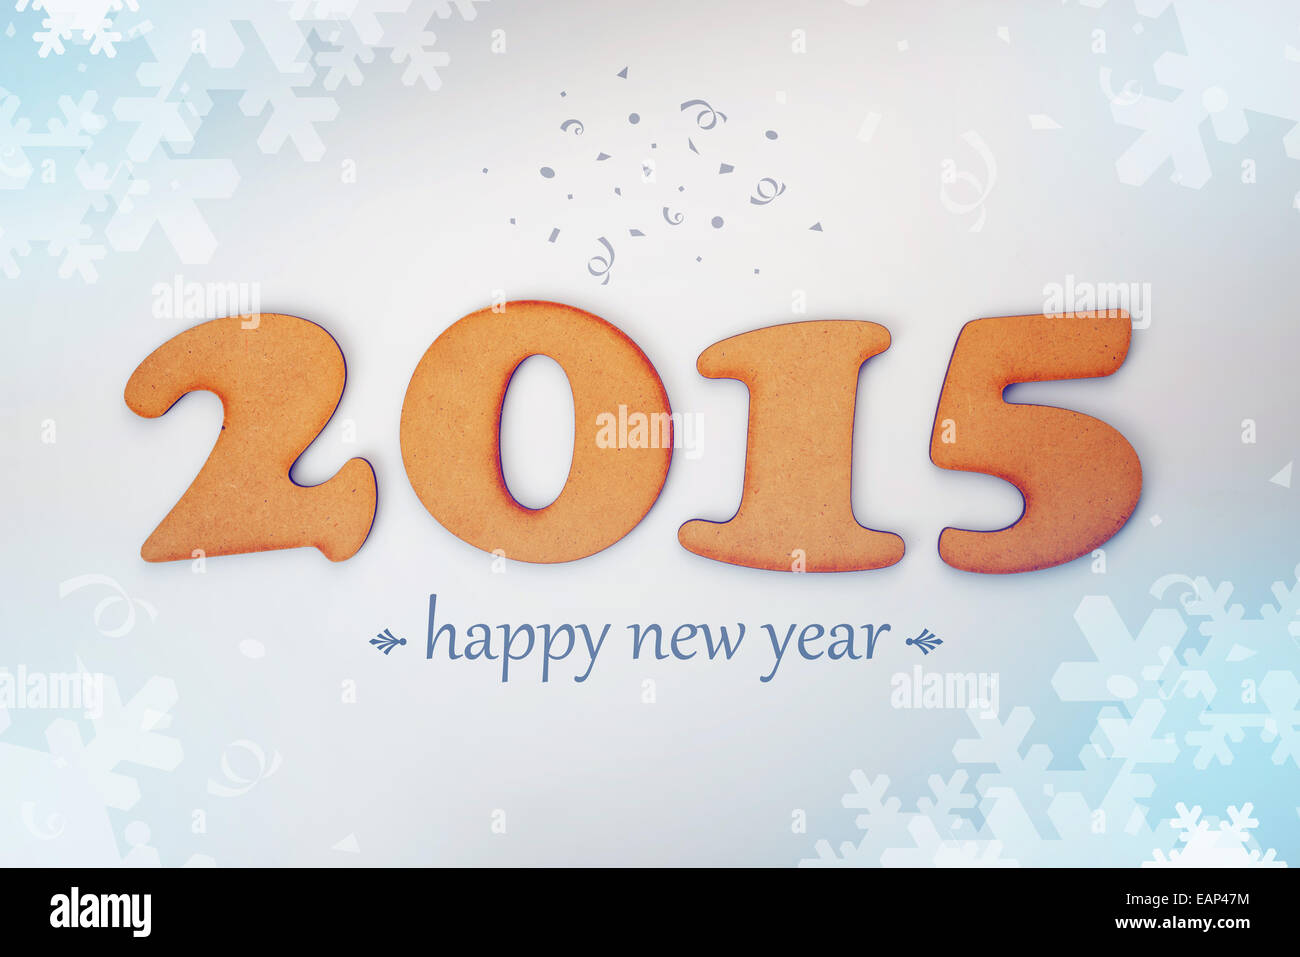 Happy New 2015 Year, conceptual background with wooden figures. Stock Photo